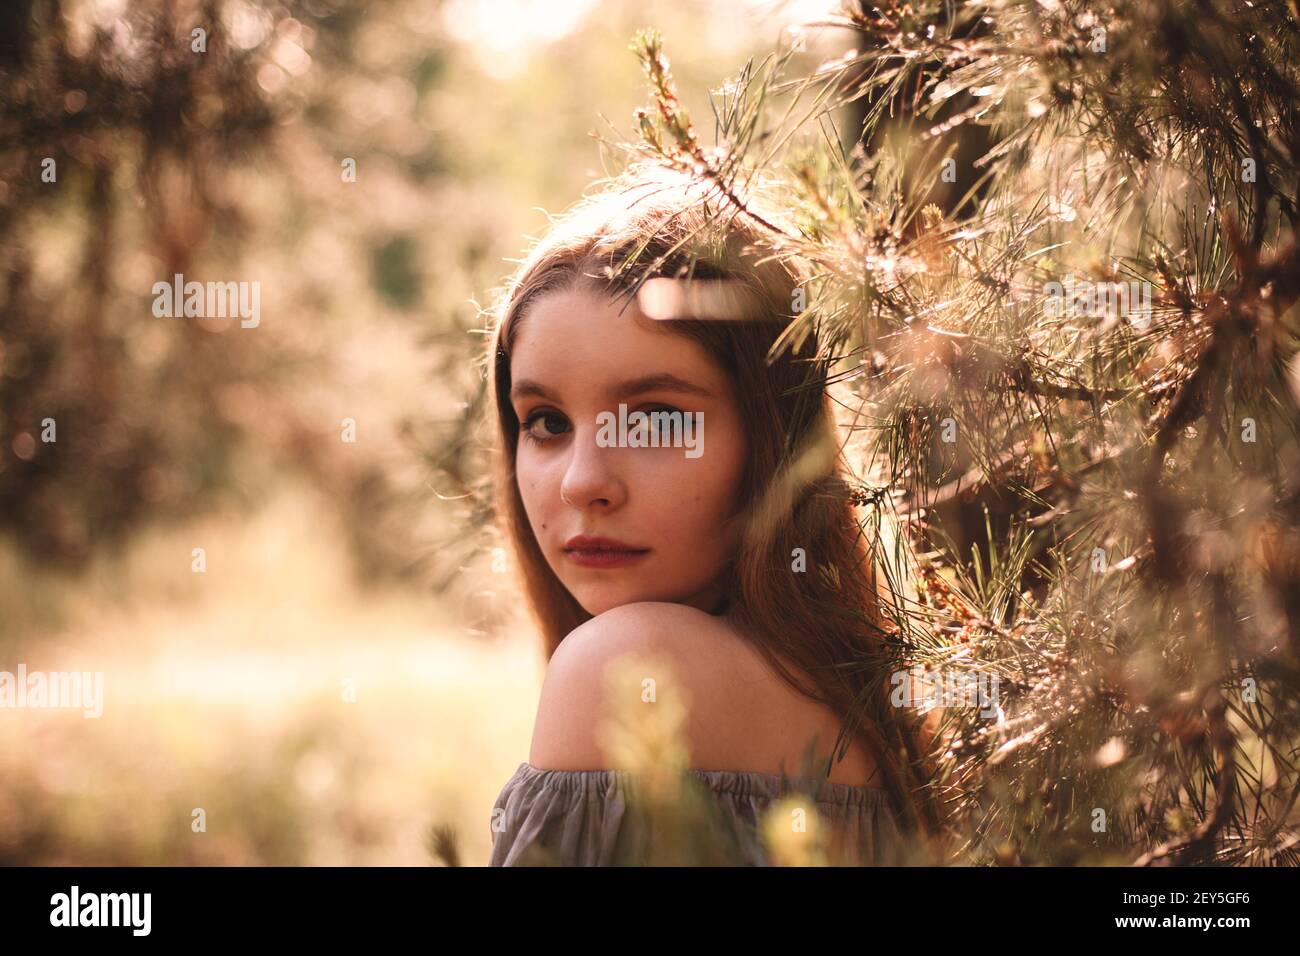 Portrait of teenage girl standing by pine tree in forest during summer Stock Photo